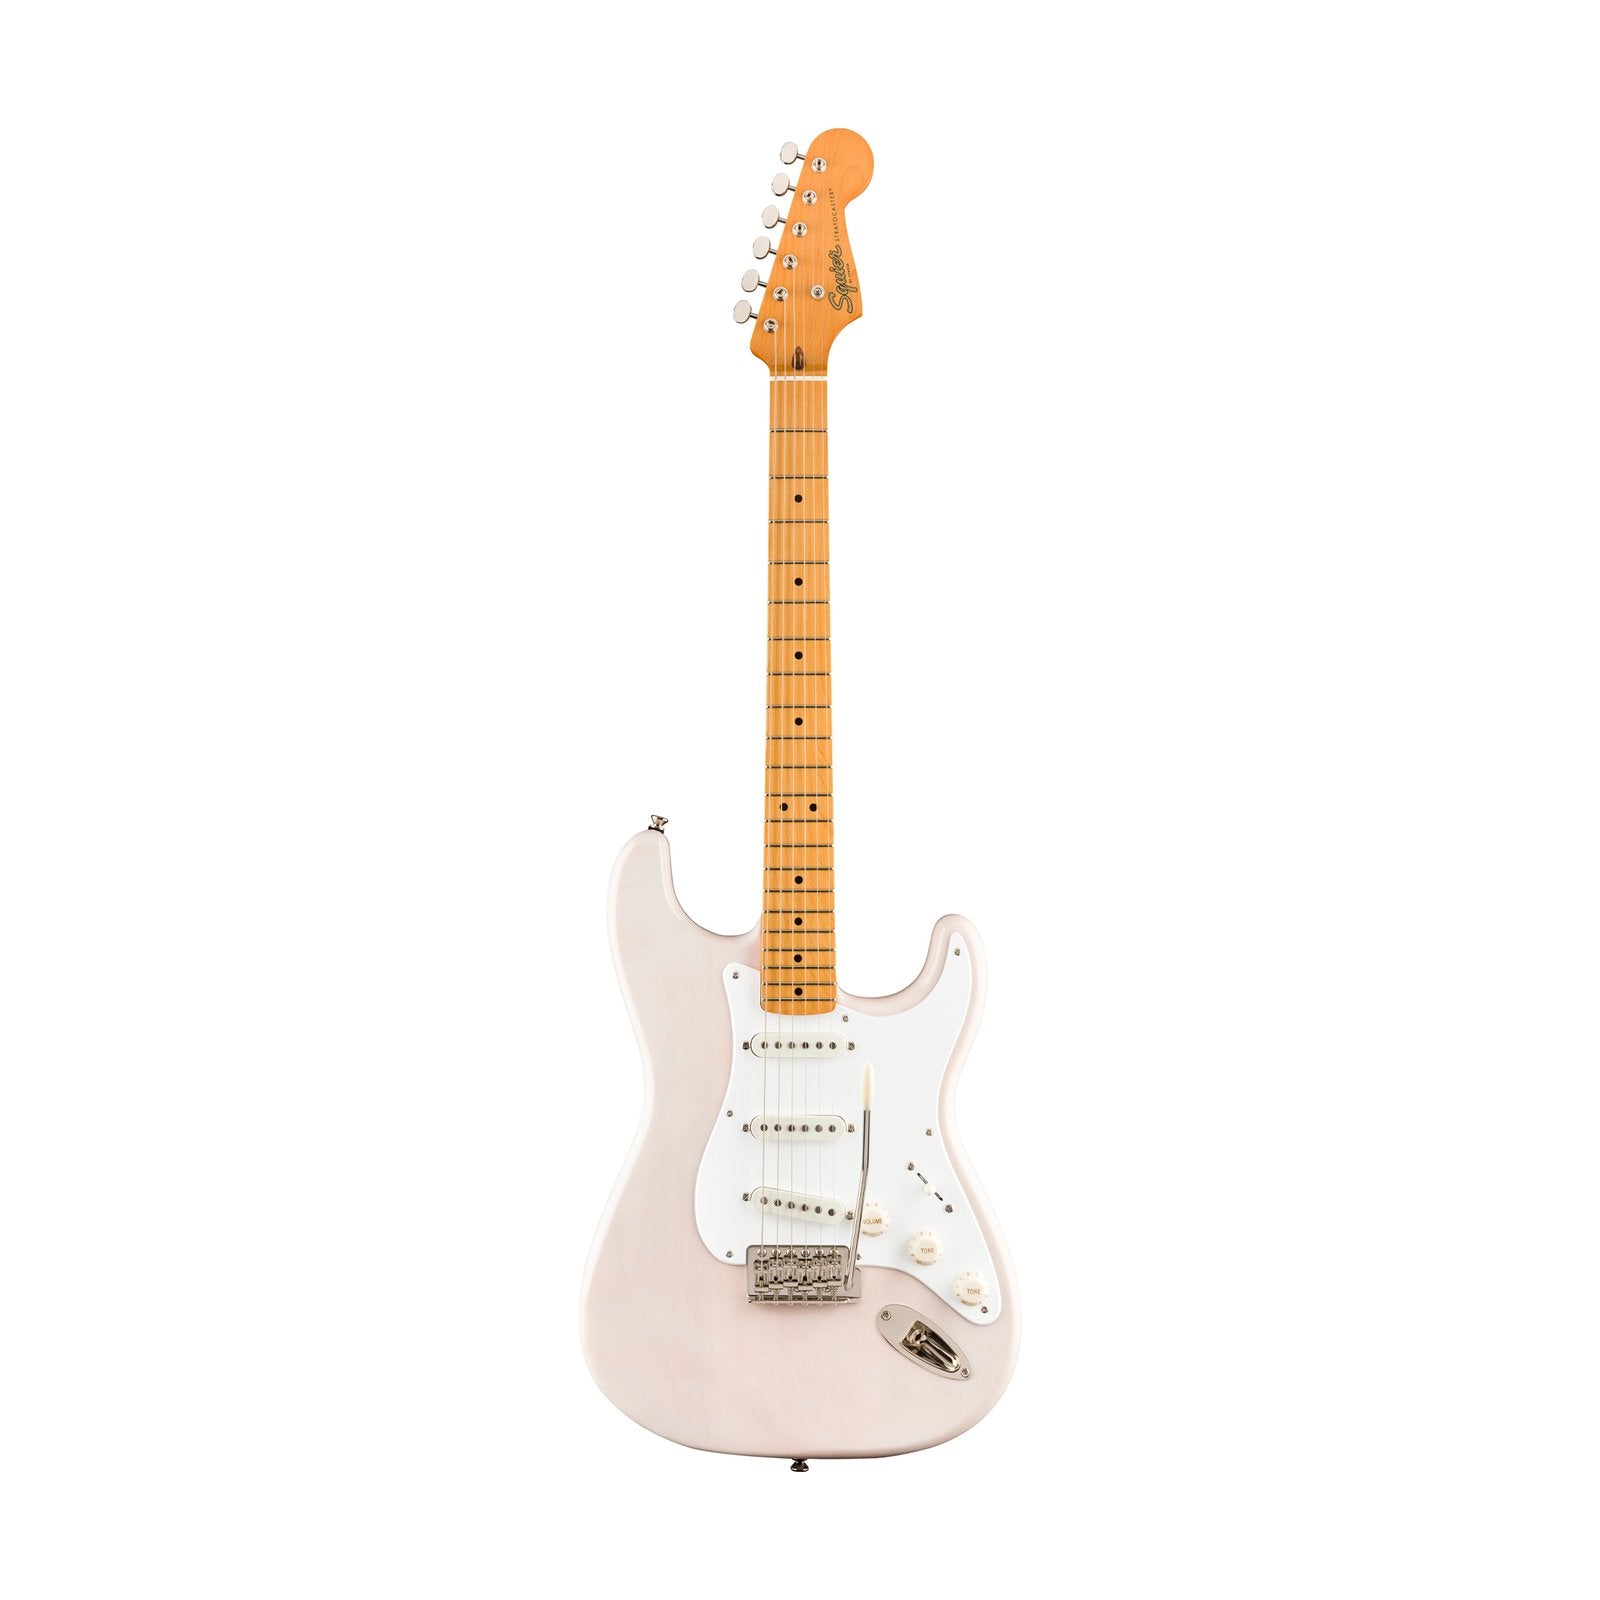 Squier Classic Vibe 50s Stratocaster Electric Guitar, Maple FB, White Blonde, SQUIER BY FENDER, ELECTRIC GUITAR, squier-by-fender-electric-guitar-037-4005-501, ZOSO MUSIC SDN BHD